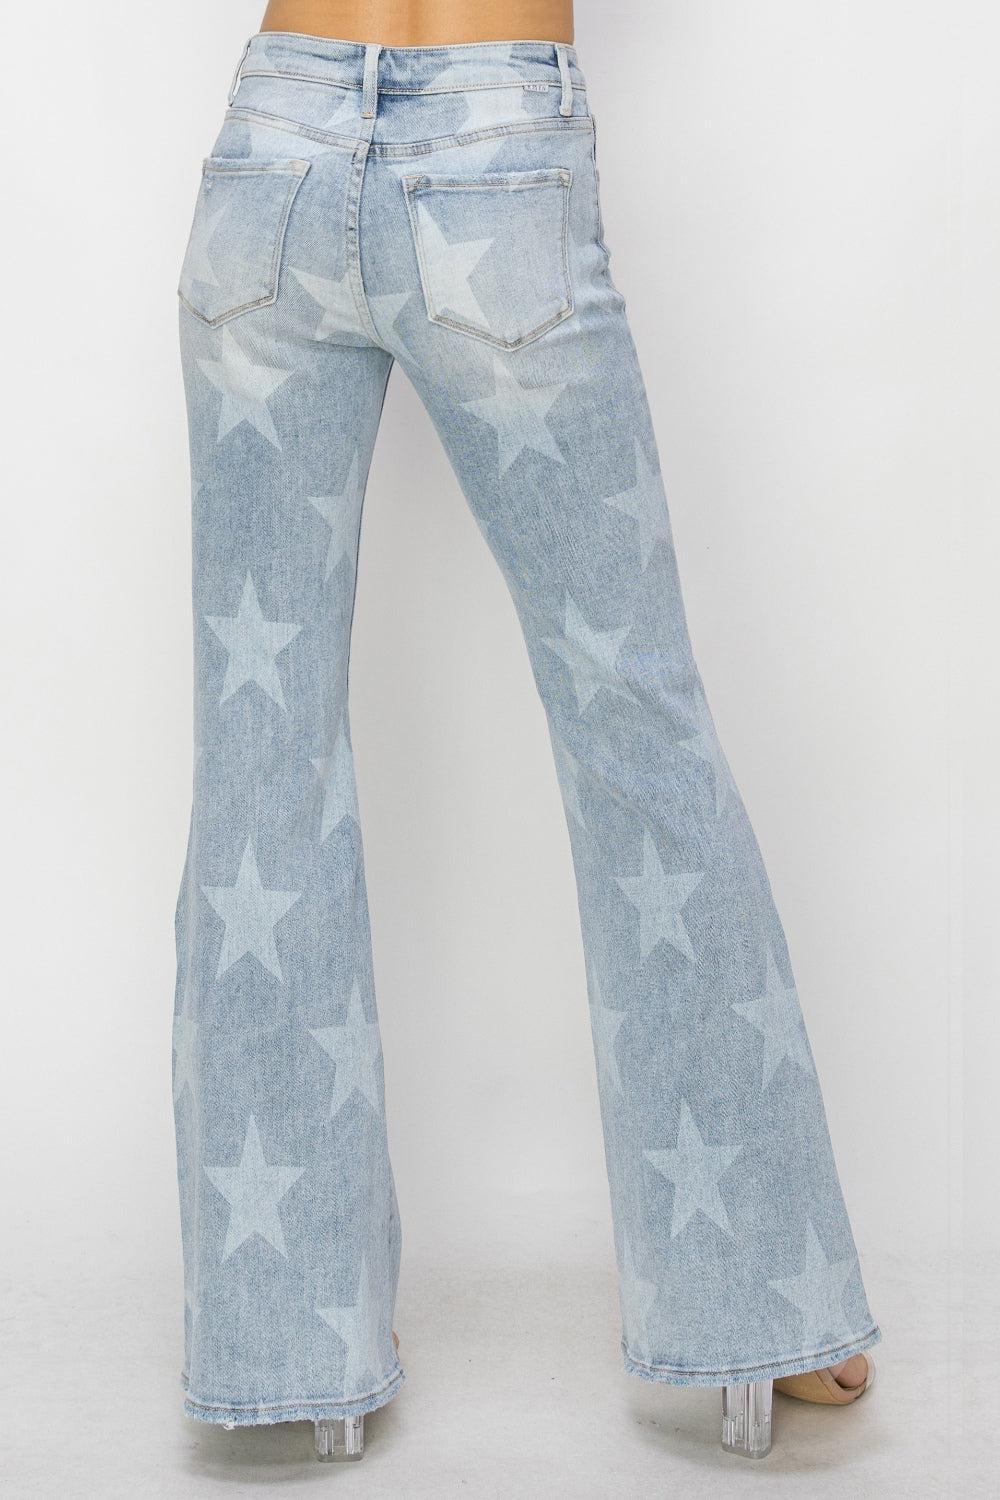 a woman wearing a pair of jeans with stars on them